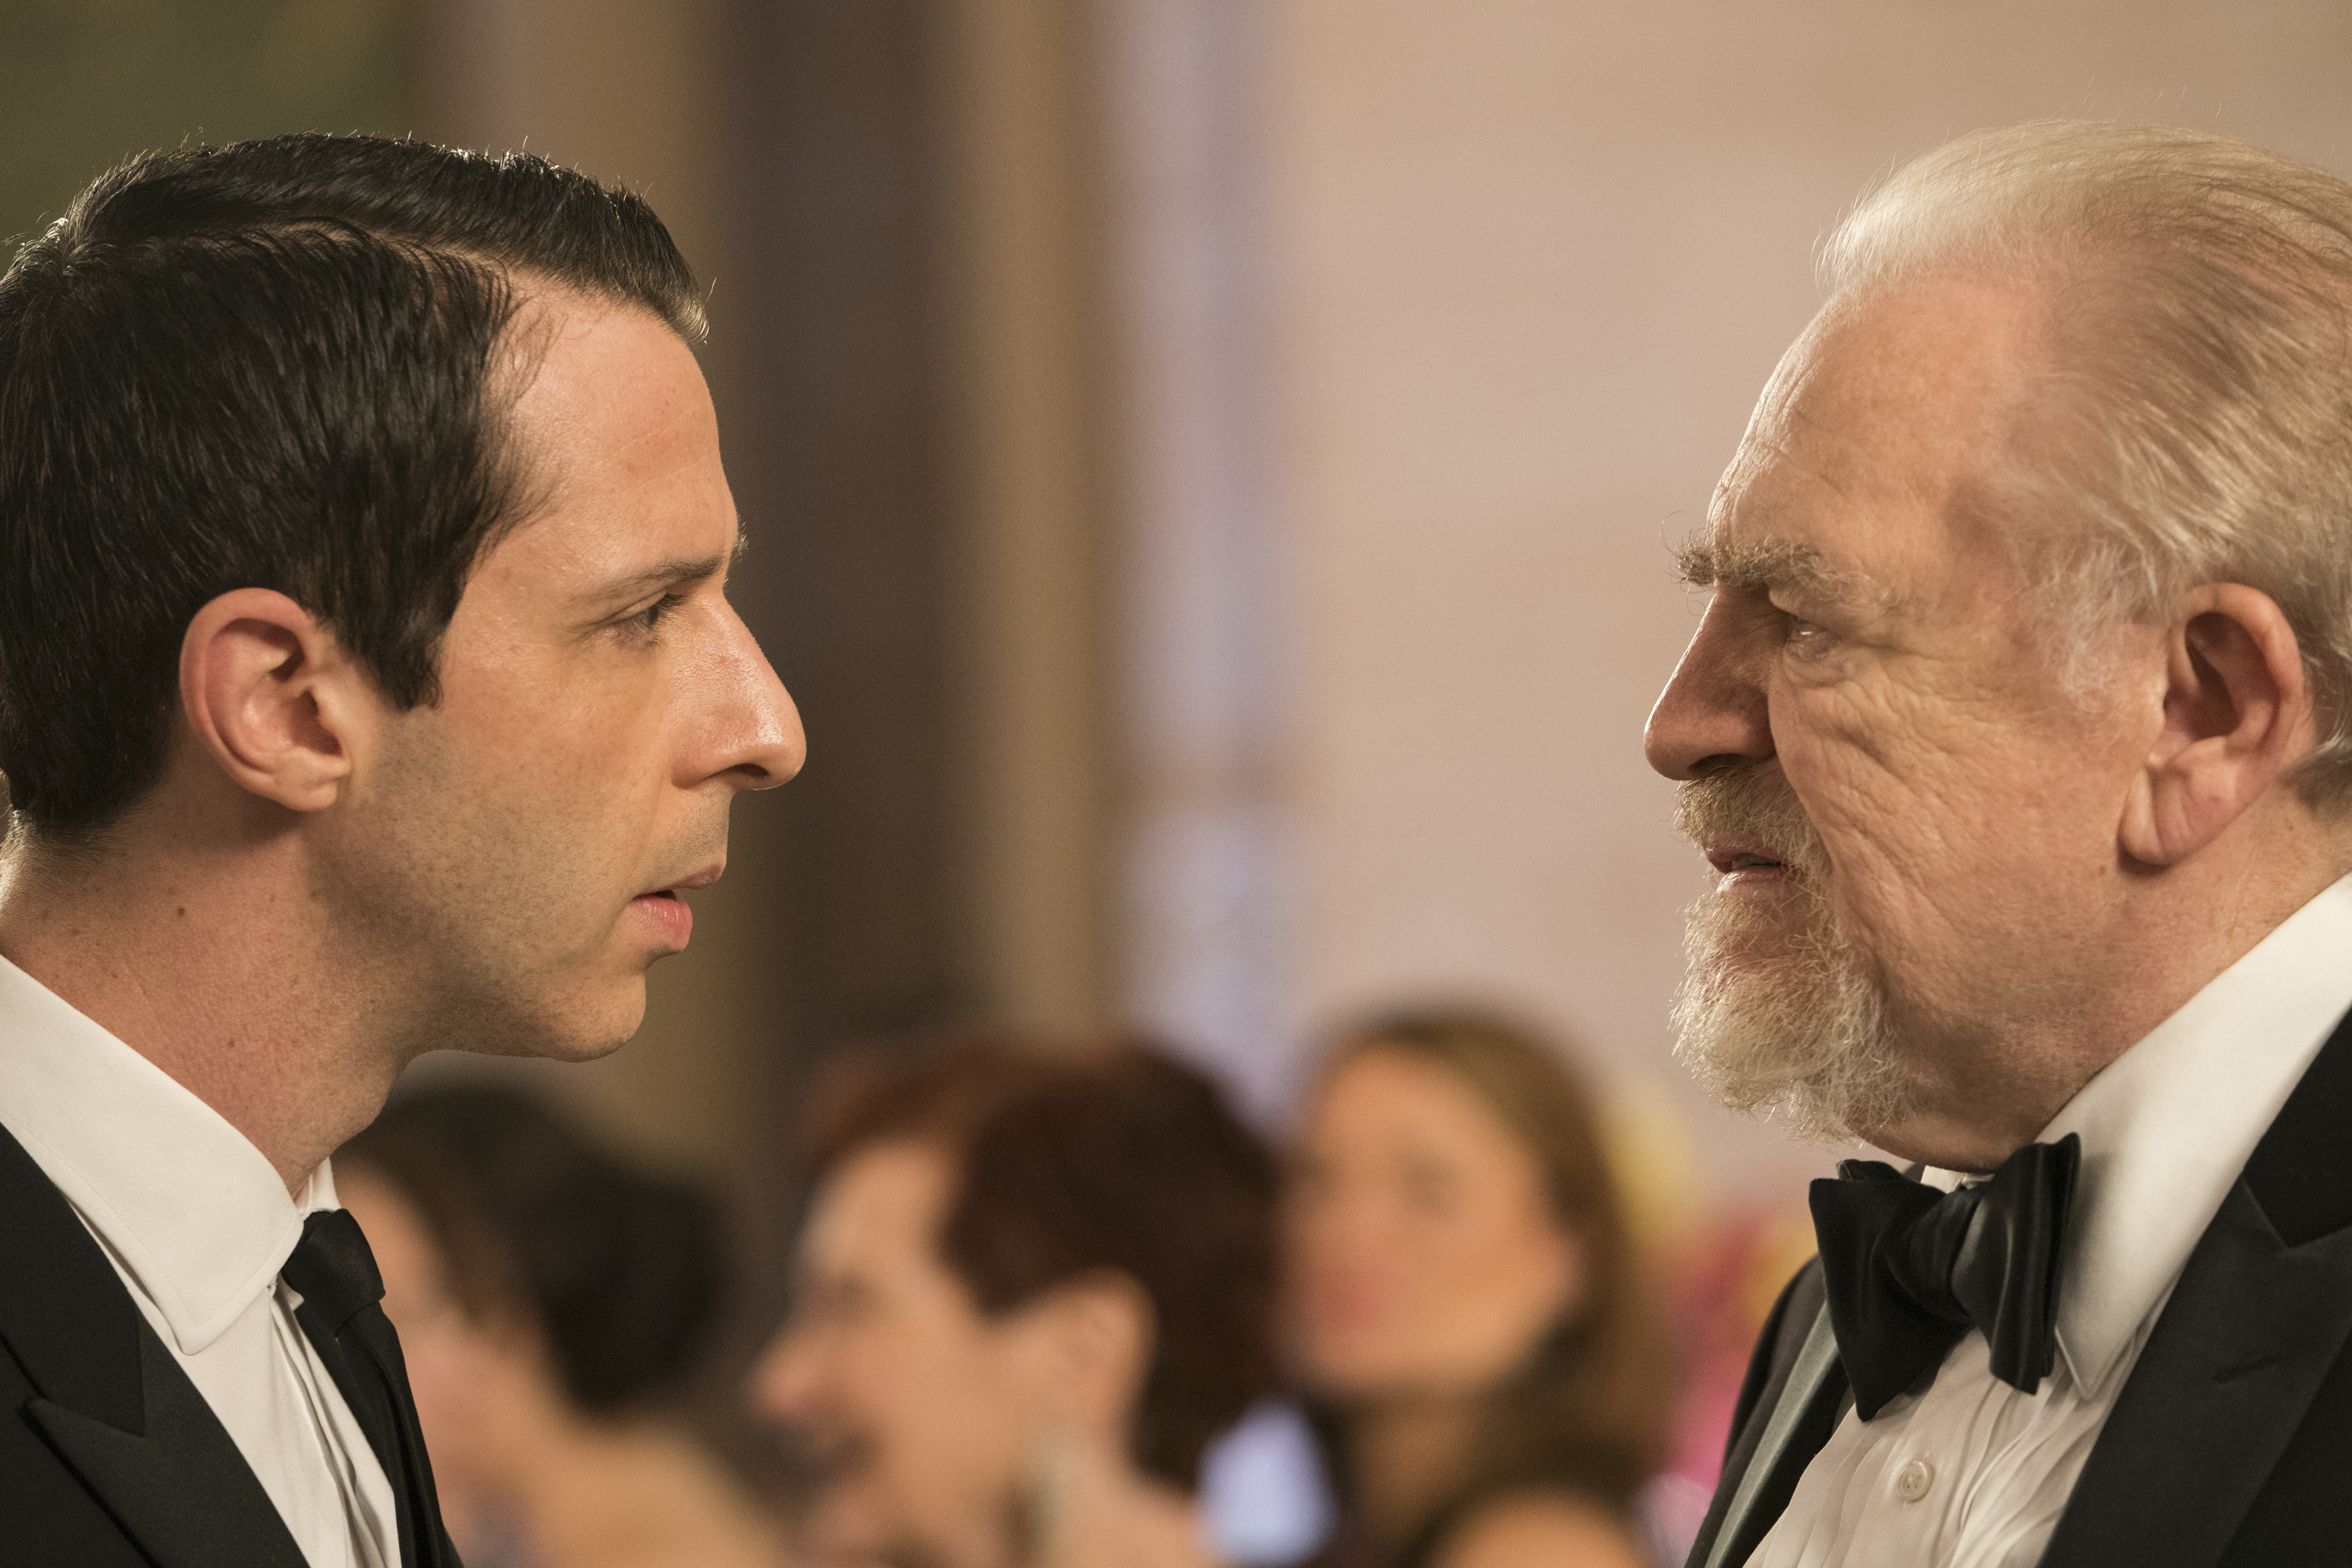 Succession: The Complete First Season still (HBO)